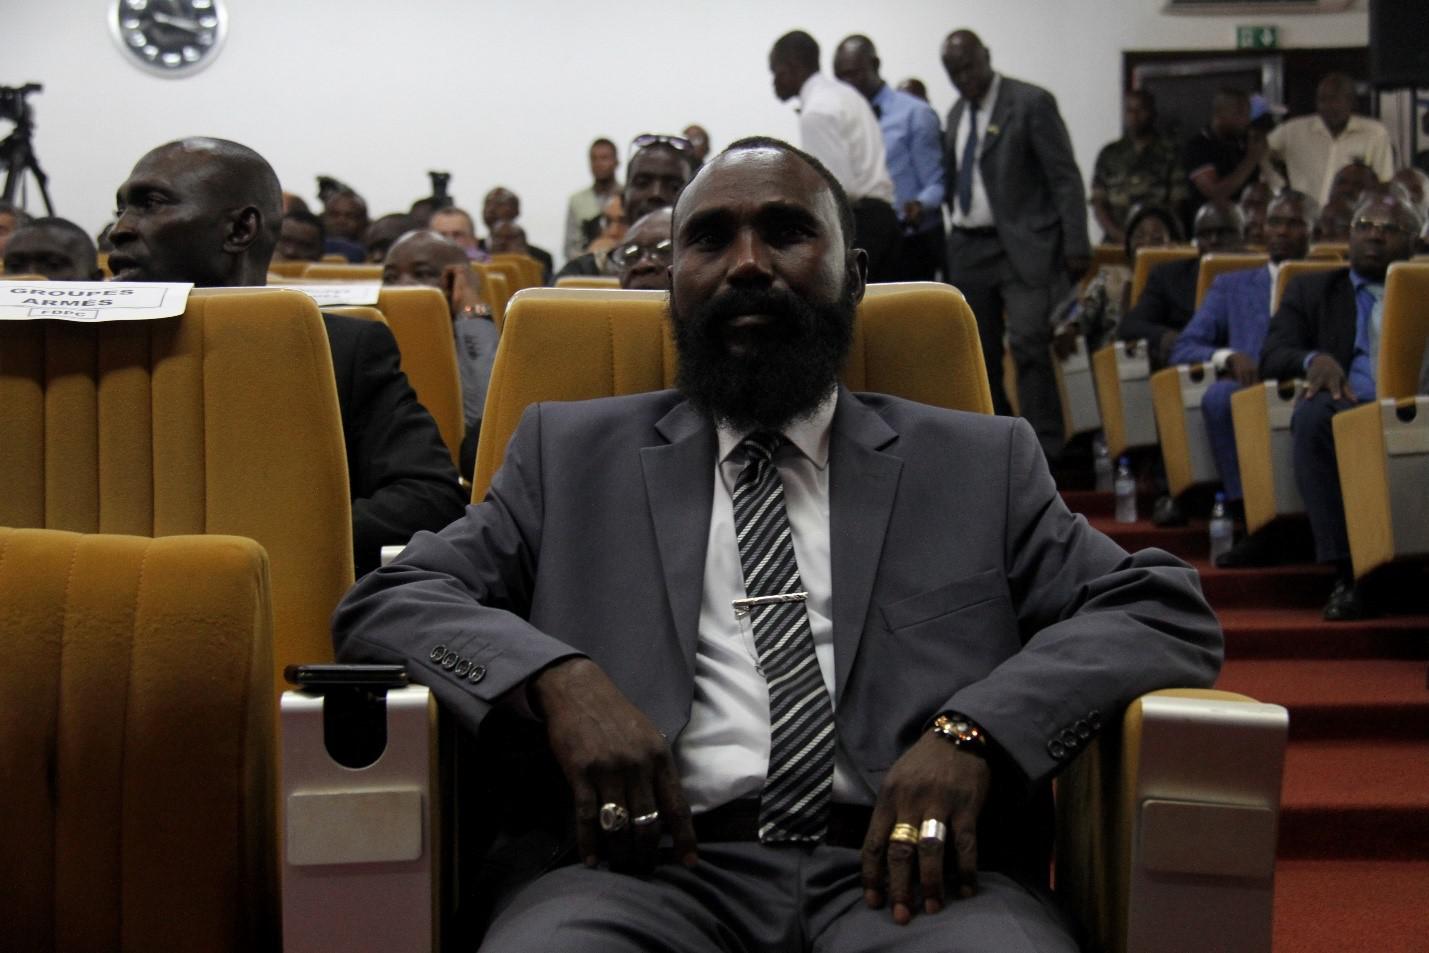 Mahamat Al Khatim, commander of the Central African Patriotic Movement (Mouvement Patriotique pour la Centrafrique, MPC), at the peace deal signing ceremony in Bangui on February 6. Fighters from the MPC have committed abuses that could amount to war crim